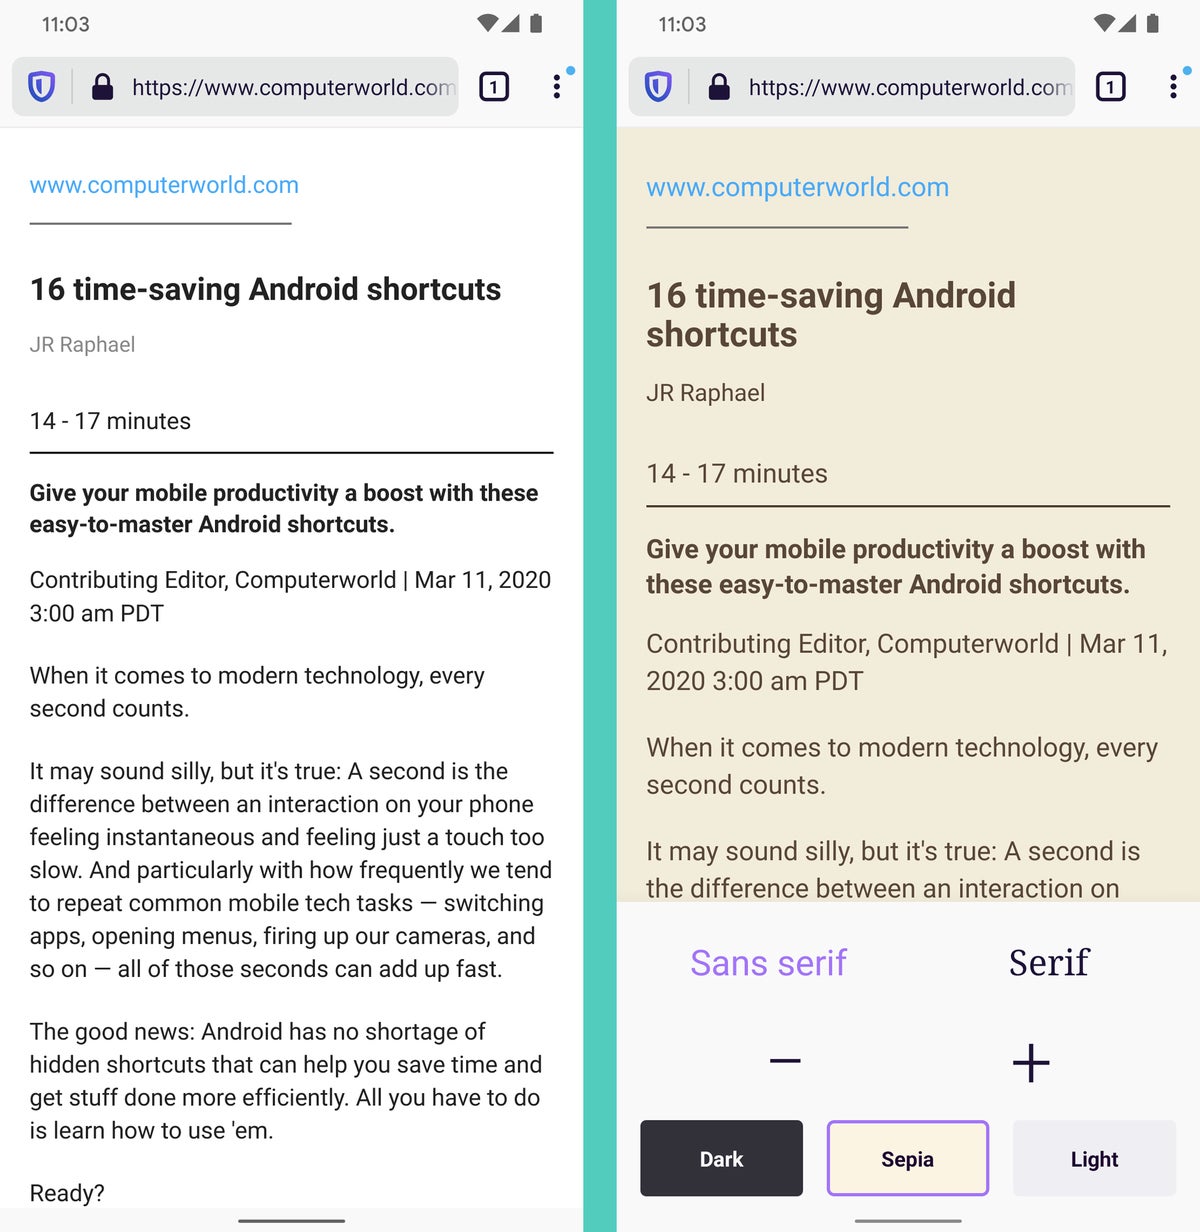 Firefox Android reader view